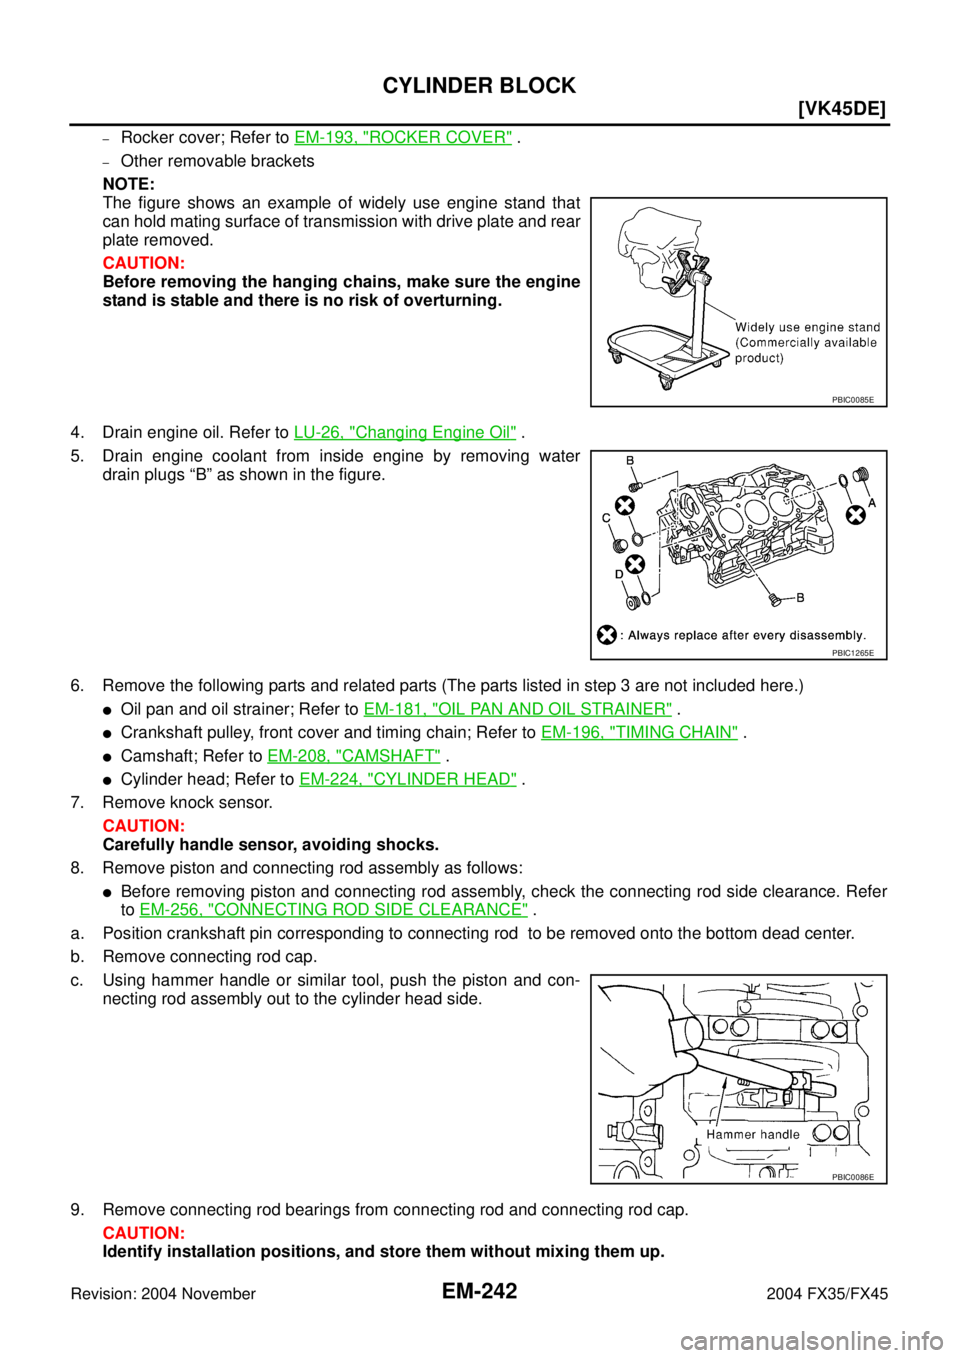 INFINITI FX35 2004  Service Manual EM-242
[VK45DE]
CYLINDER BLOCK
Revision: 2004 November 2004 FX35/FX45
–Rocker cover; Refer to EM-193, "ROCKER COVER" .
–Other removable brackets
NOTE:
The figure shows an example of widely use eng